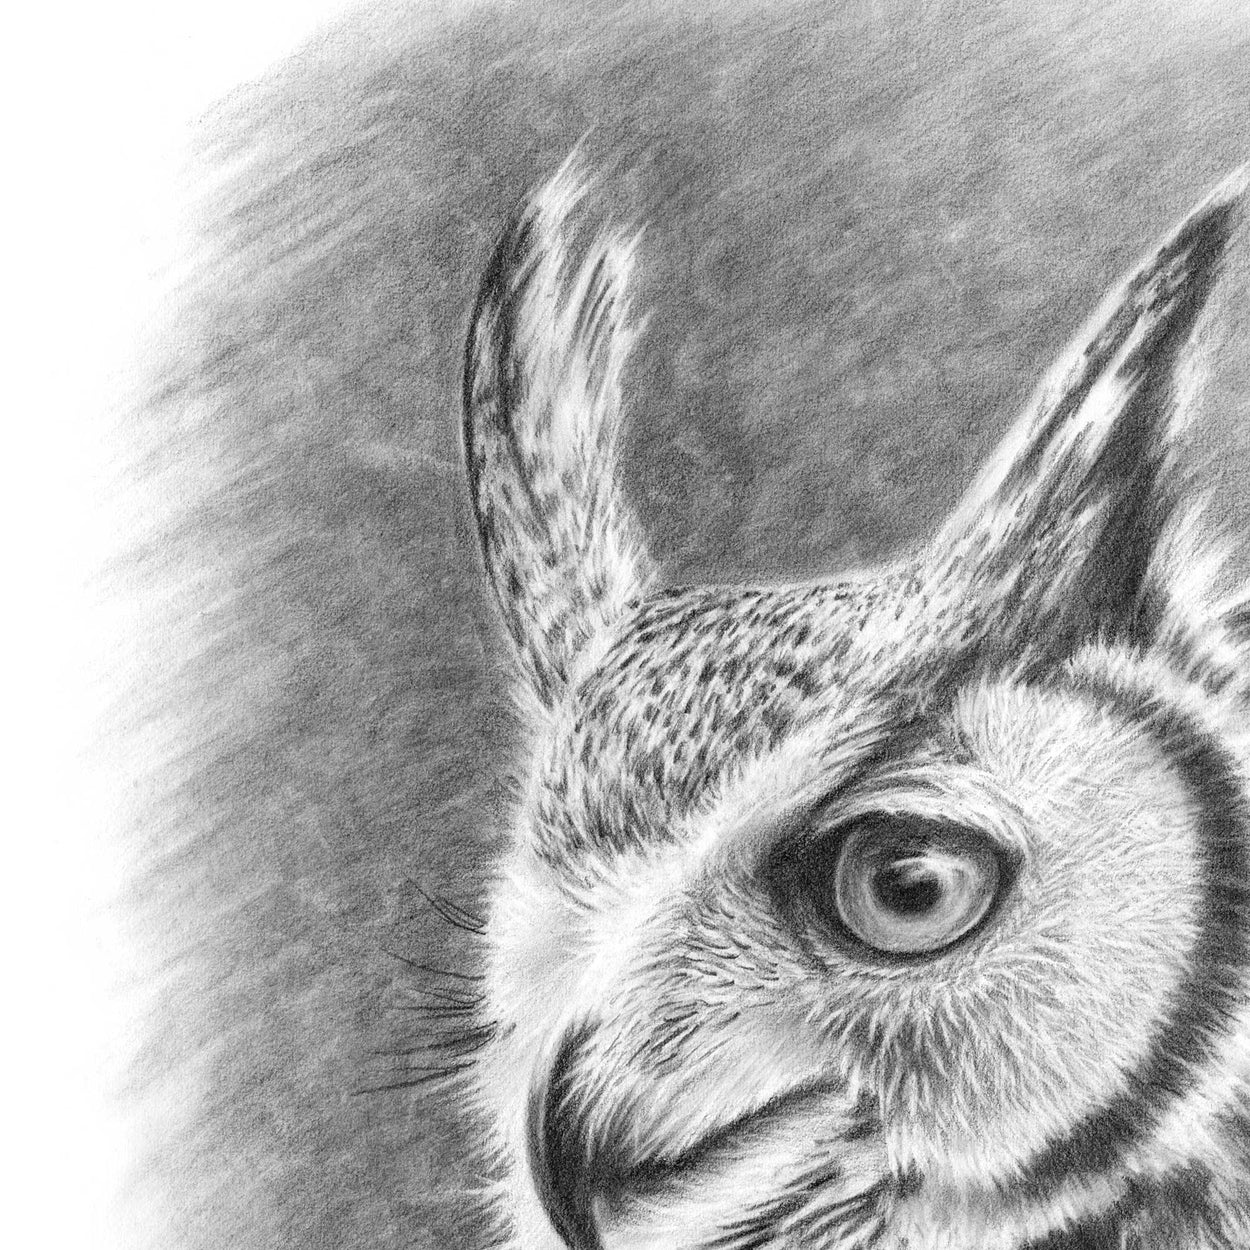 Close-up of a pencil drawing of the head and face of a great horned owl